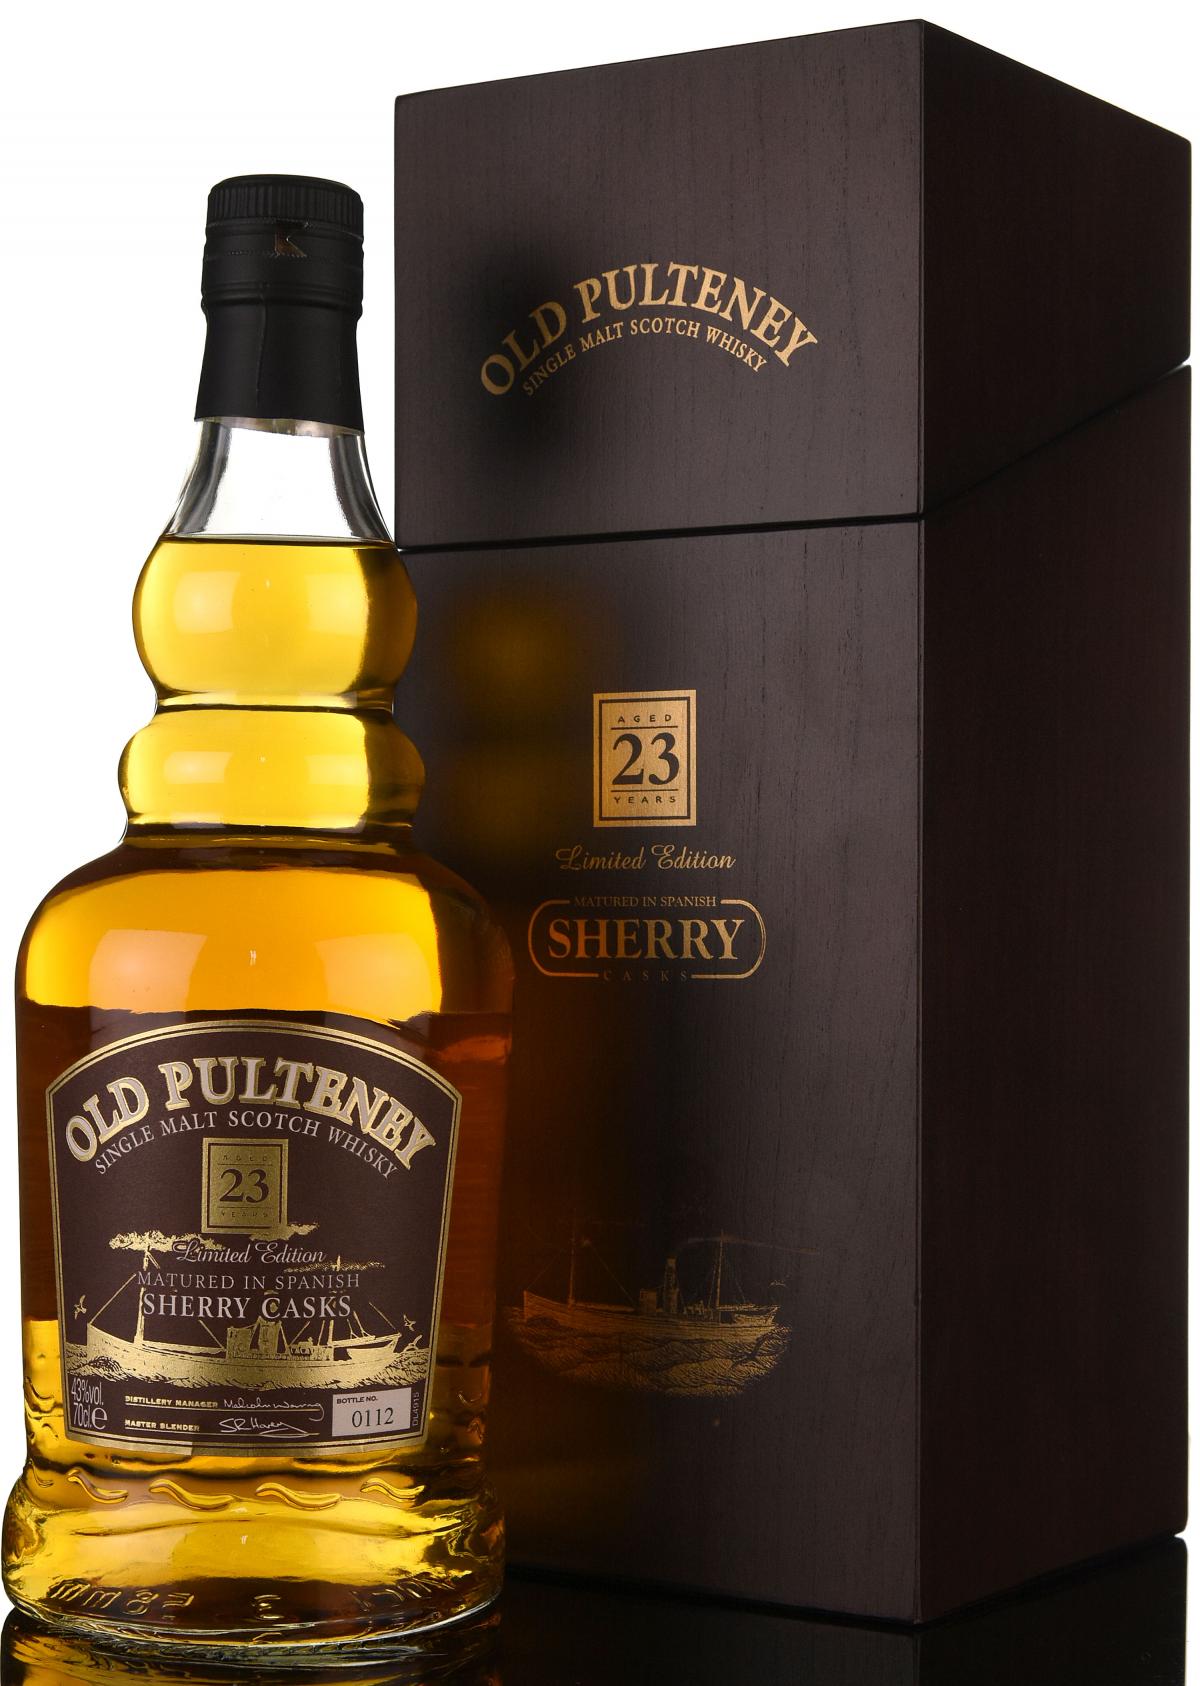 Old Pulteney 23 Year Old - Sherry Casks